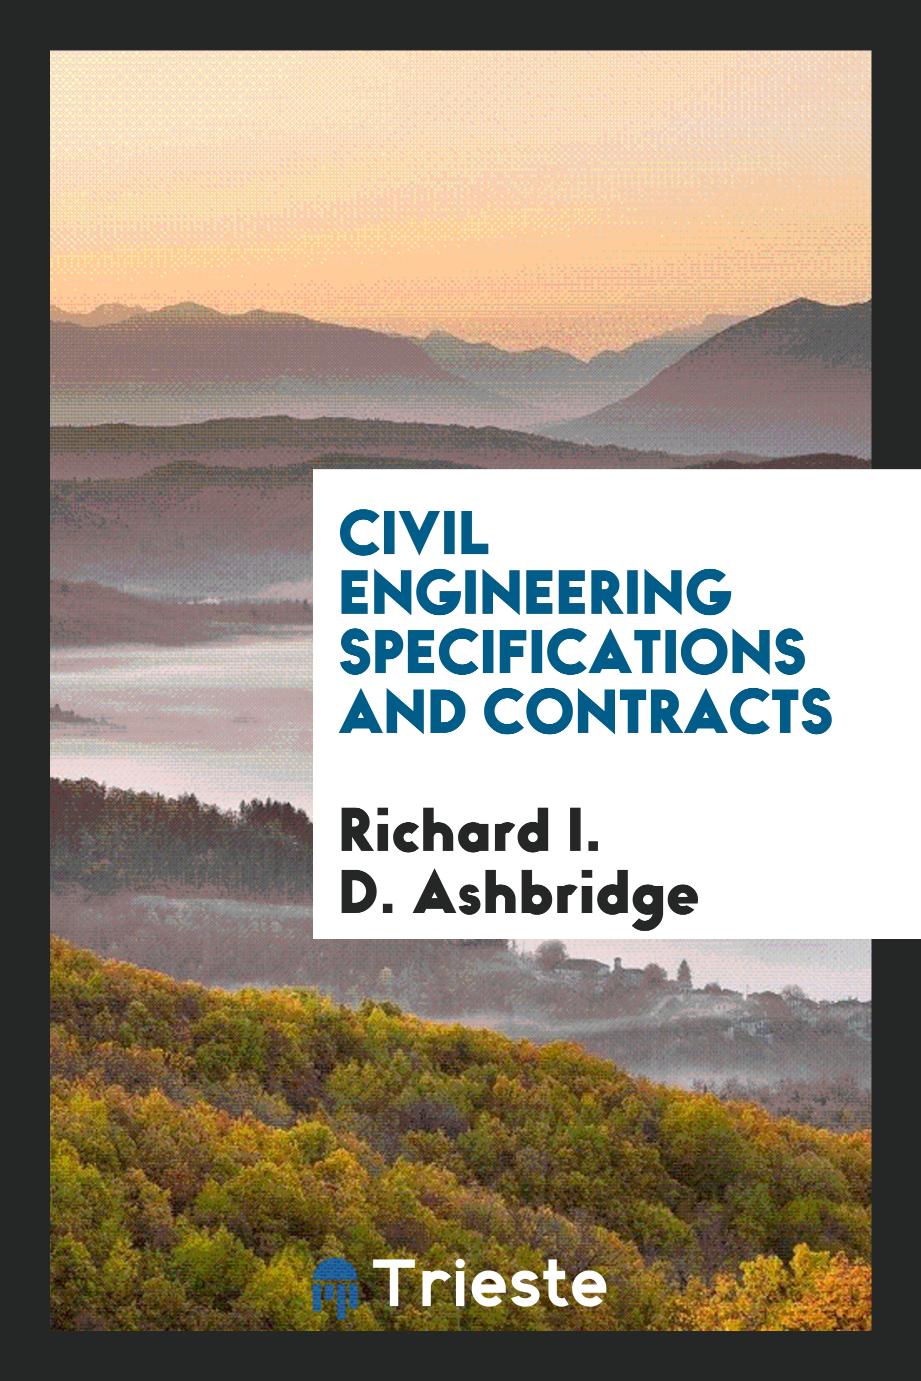 Civil Engineering Specifications and Contracts